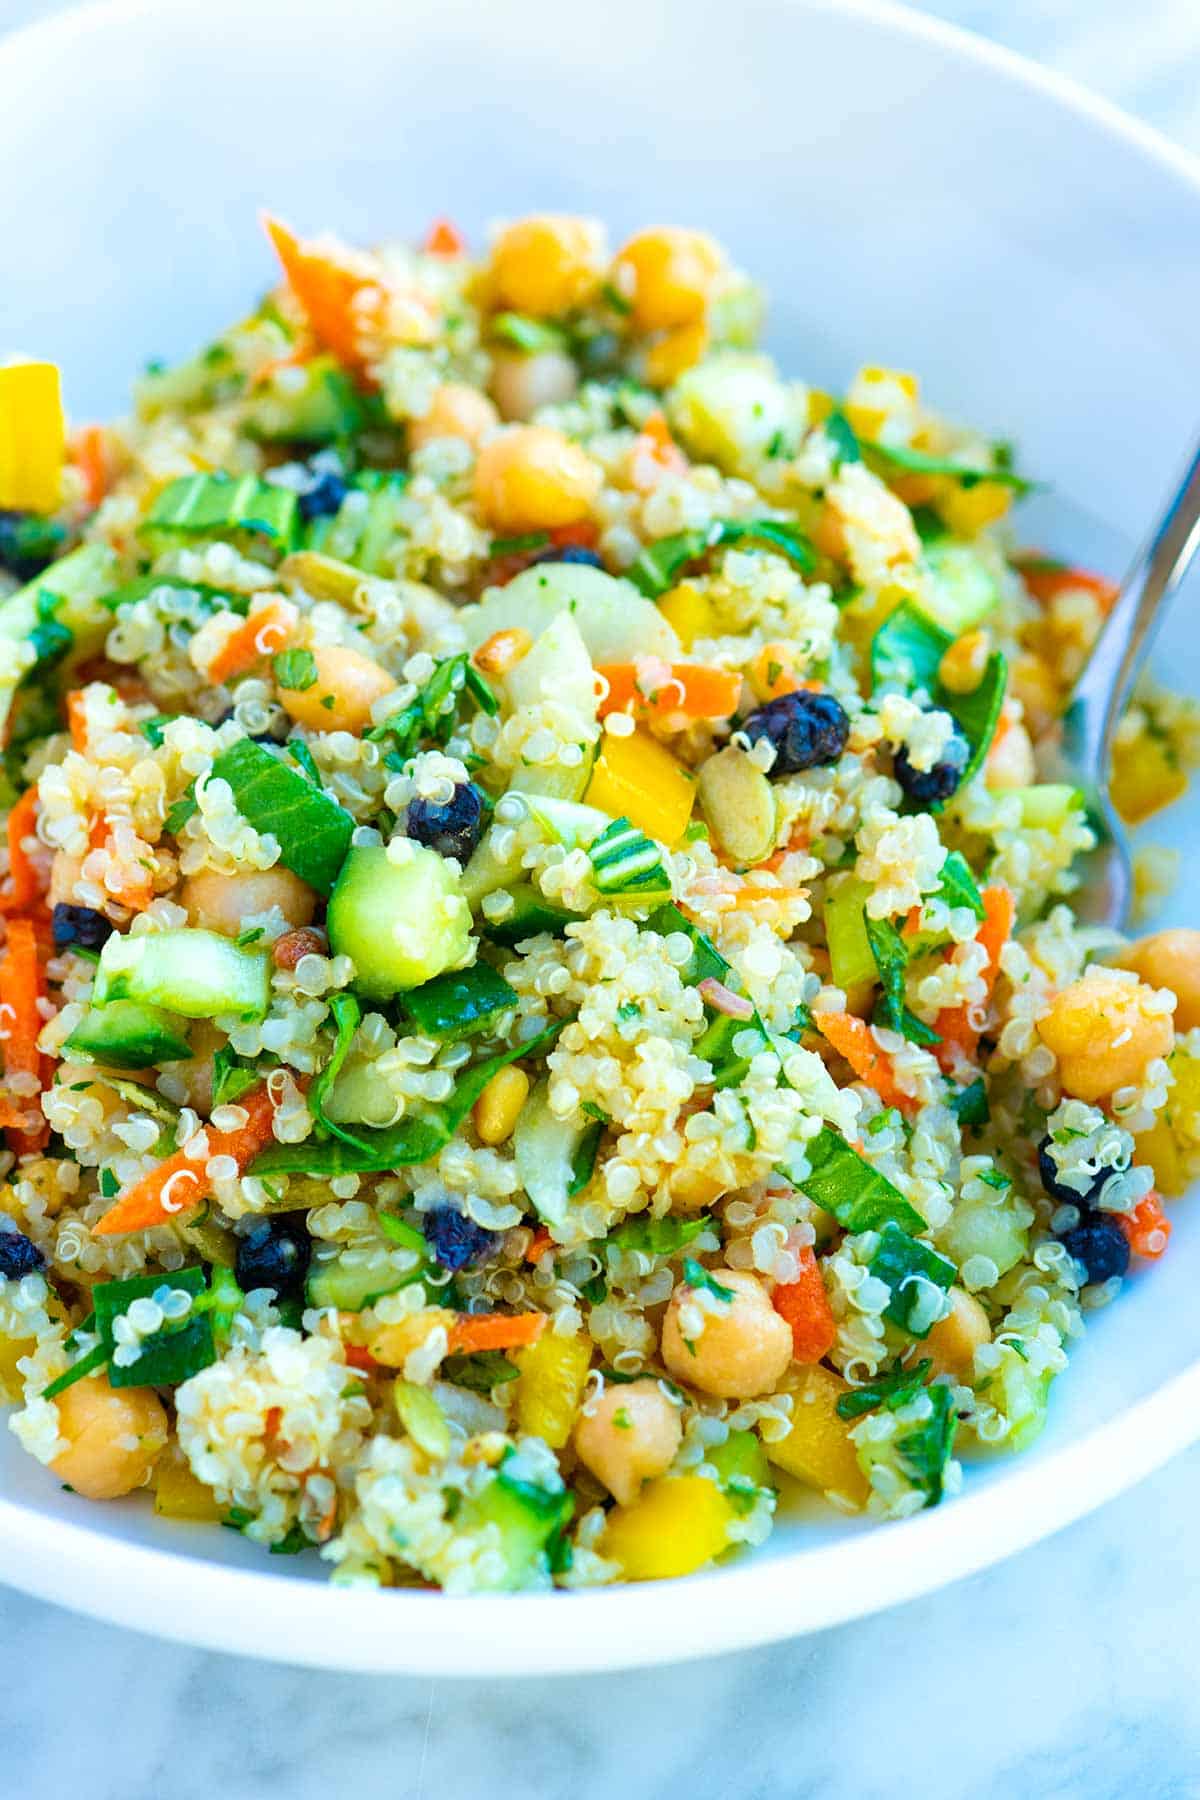 Quinoa salad with veggies, chickpeas, and dried fruit